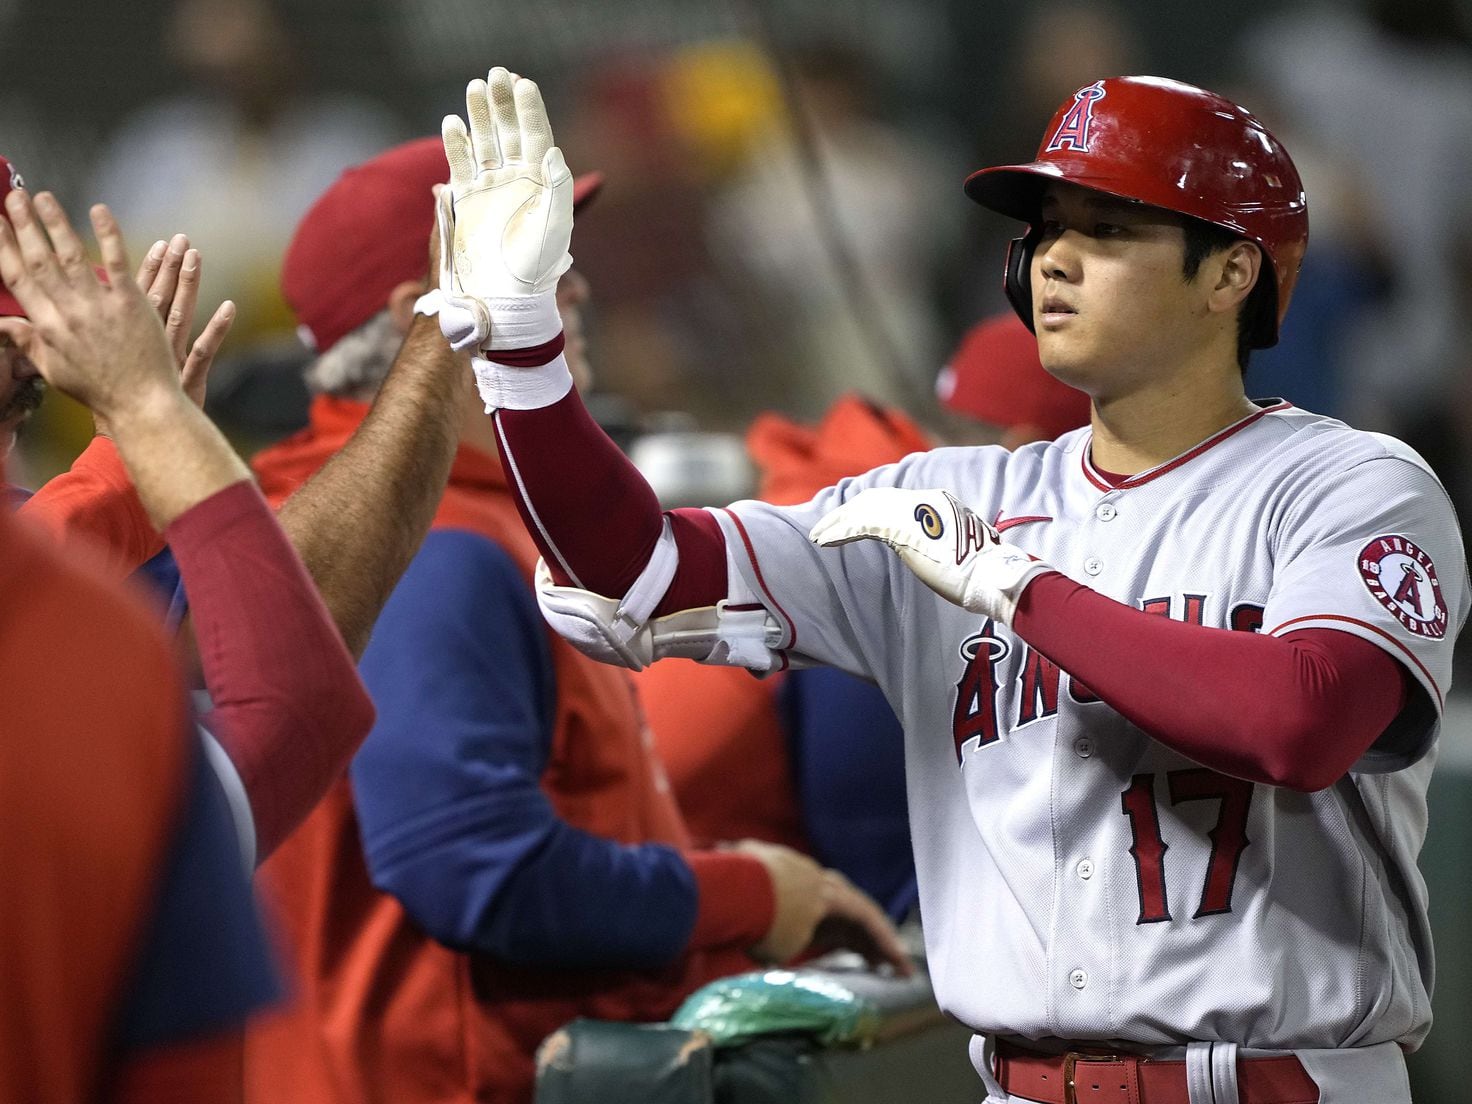 Shohei Ohtani, Kyle Schwarber named Players of the Week